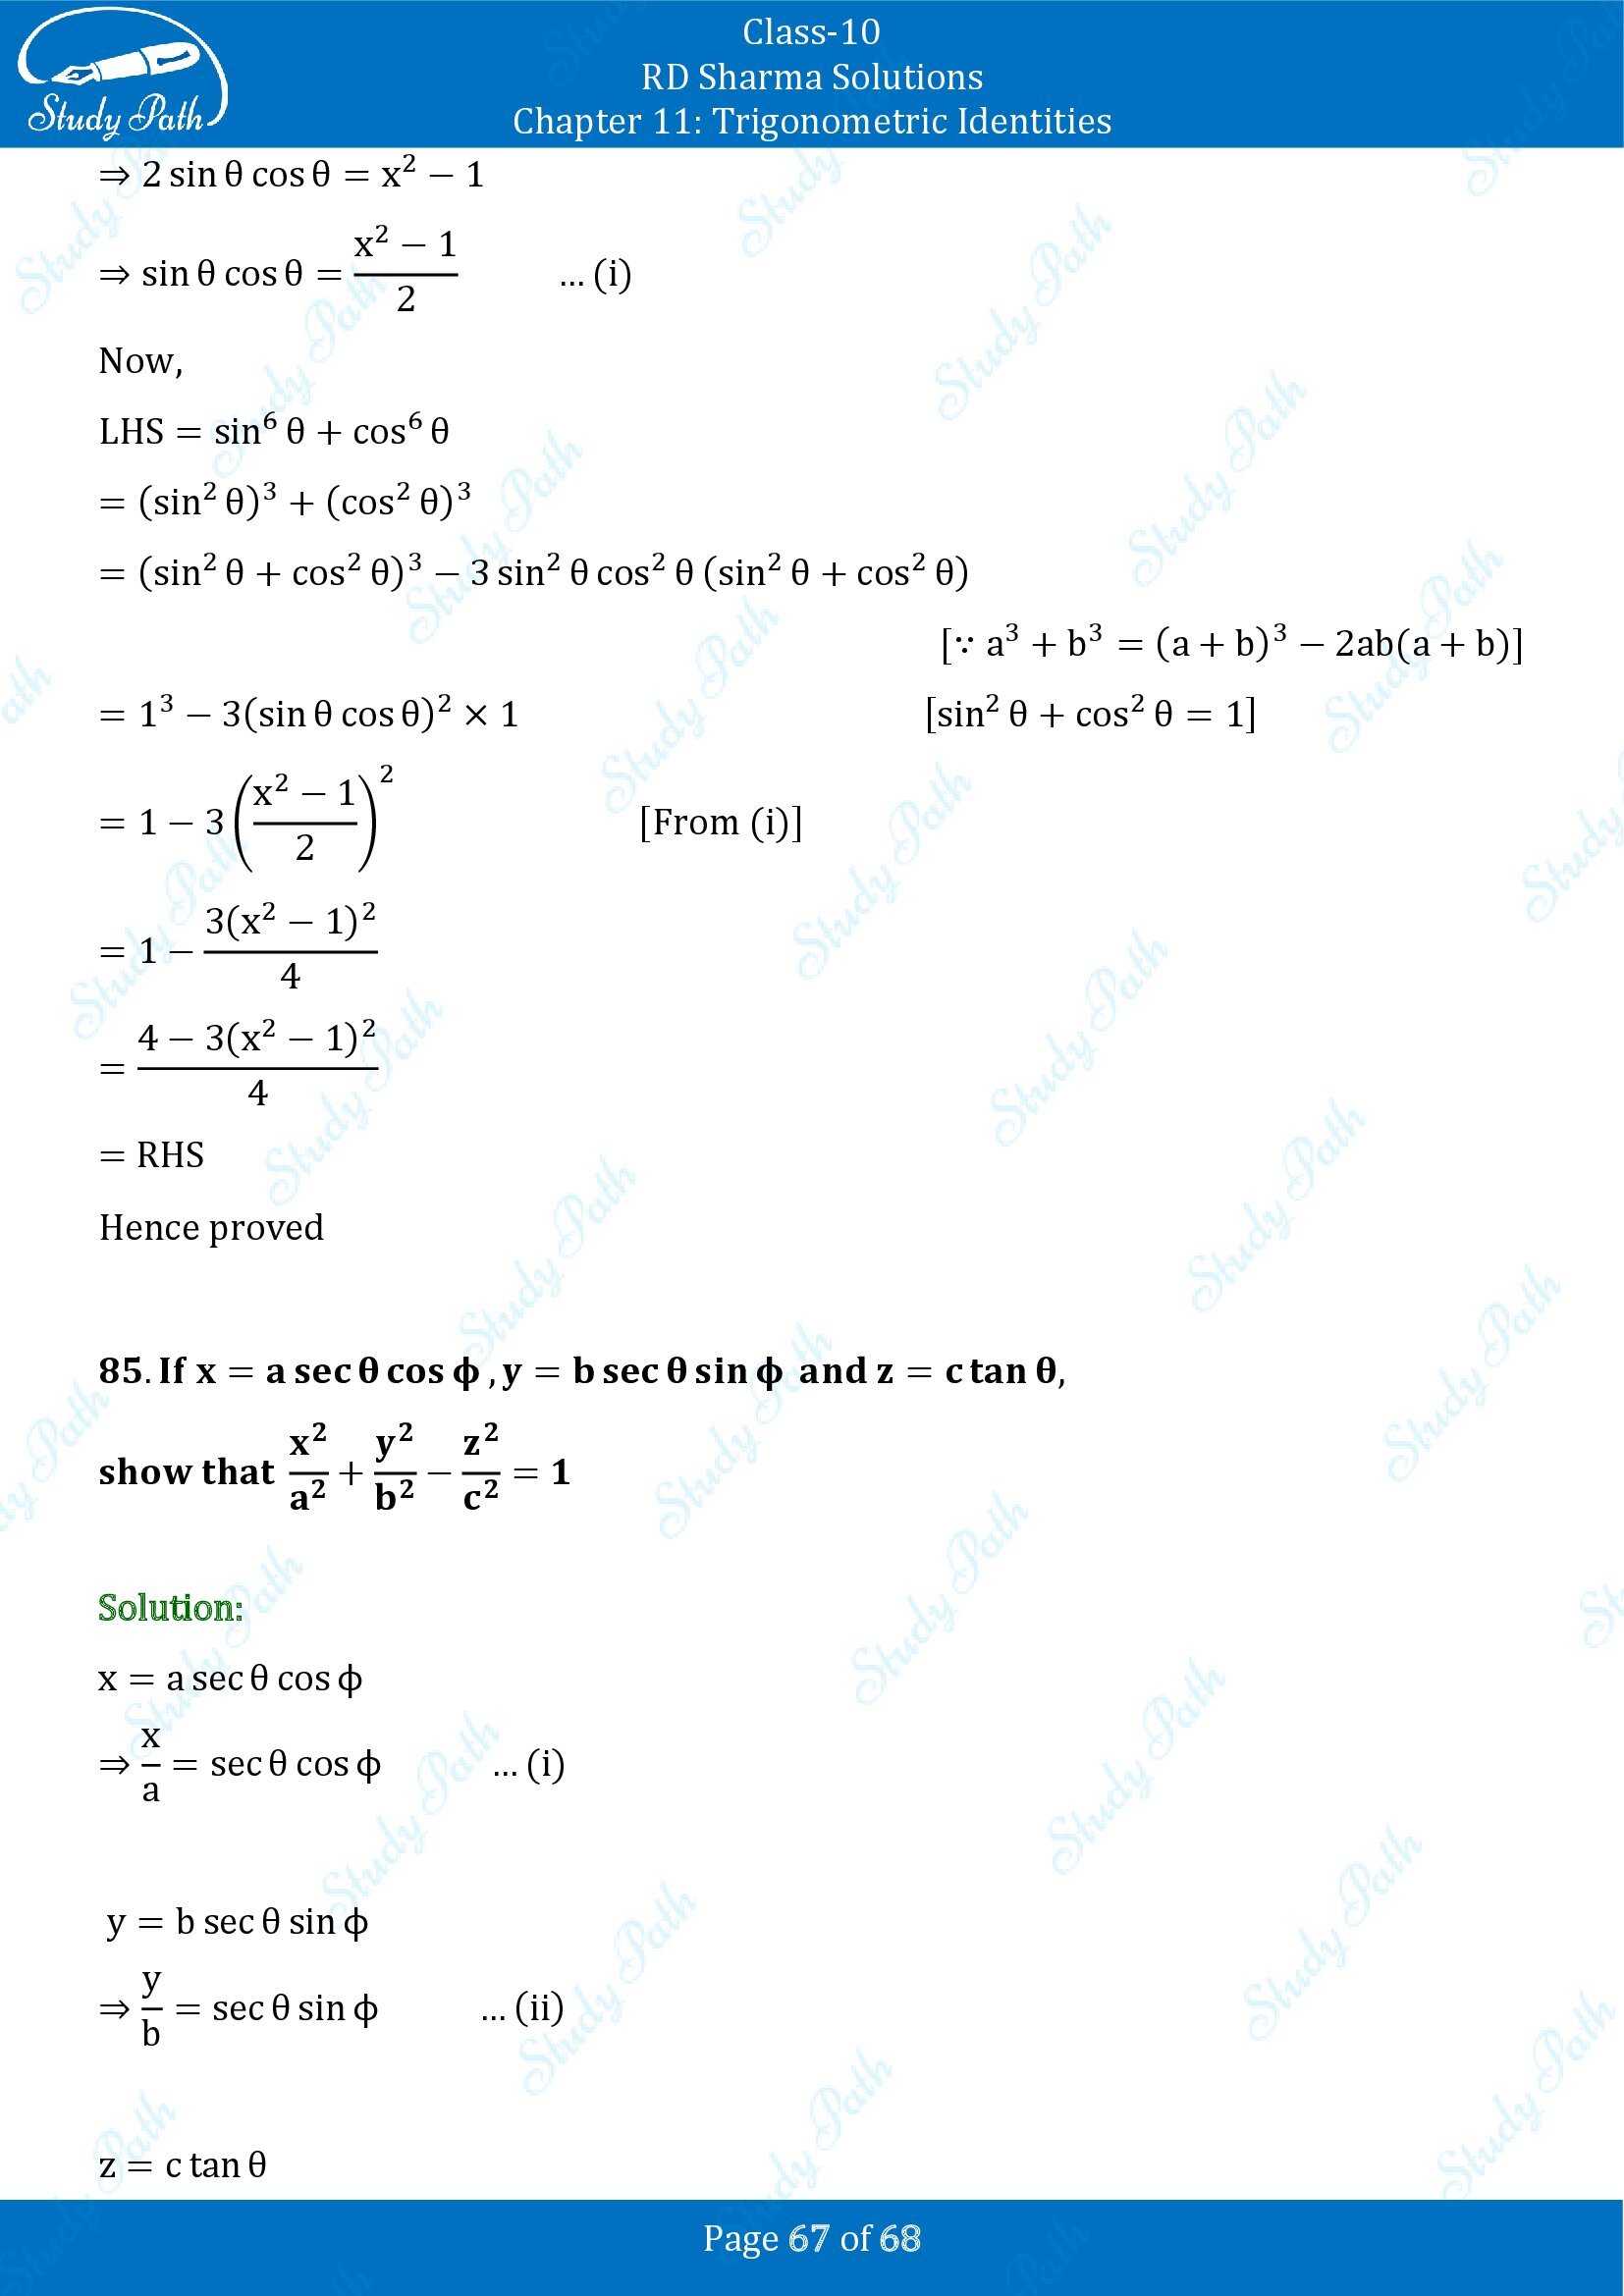 RD Sharma Solutions Class 10 Chapter 11 Trigonometric Identities Exercise 11.1 00067